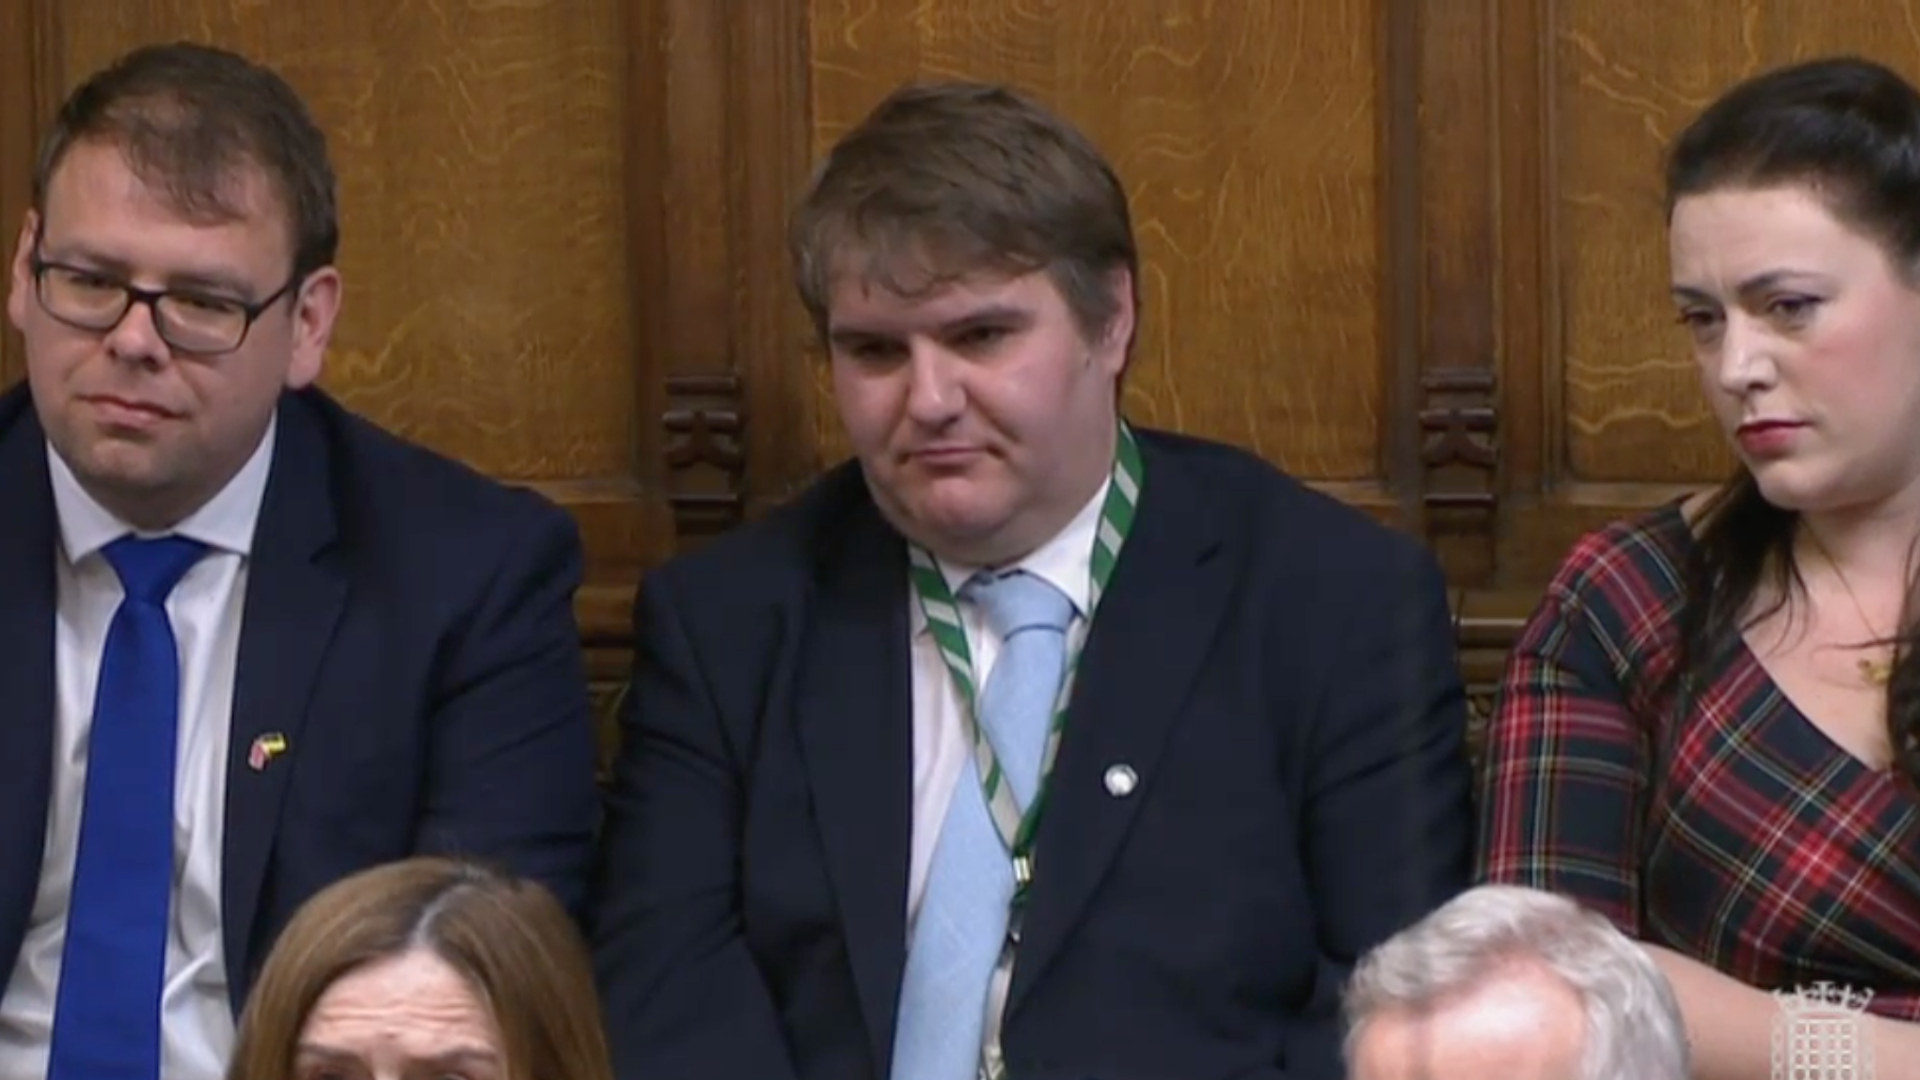 Jamie Wallis in the house of commons during PMQs after he came out in a statement posted on his website.